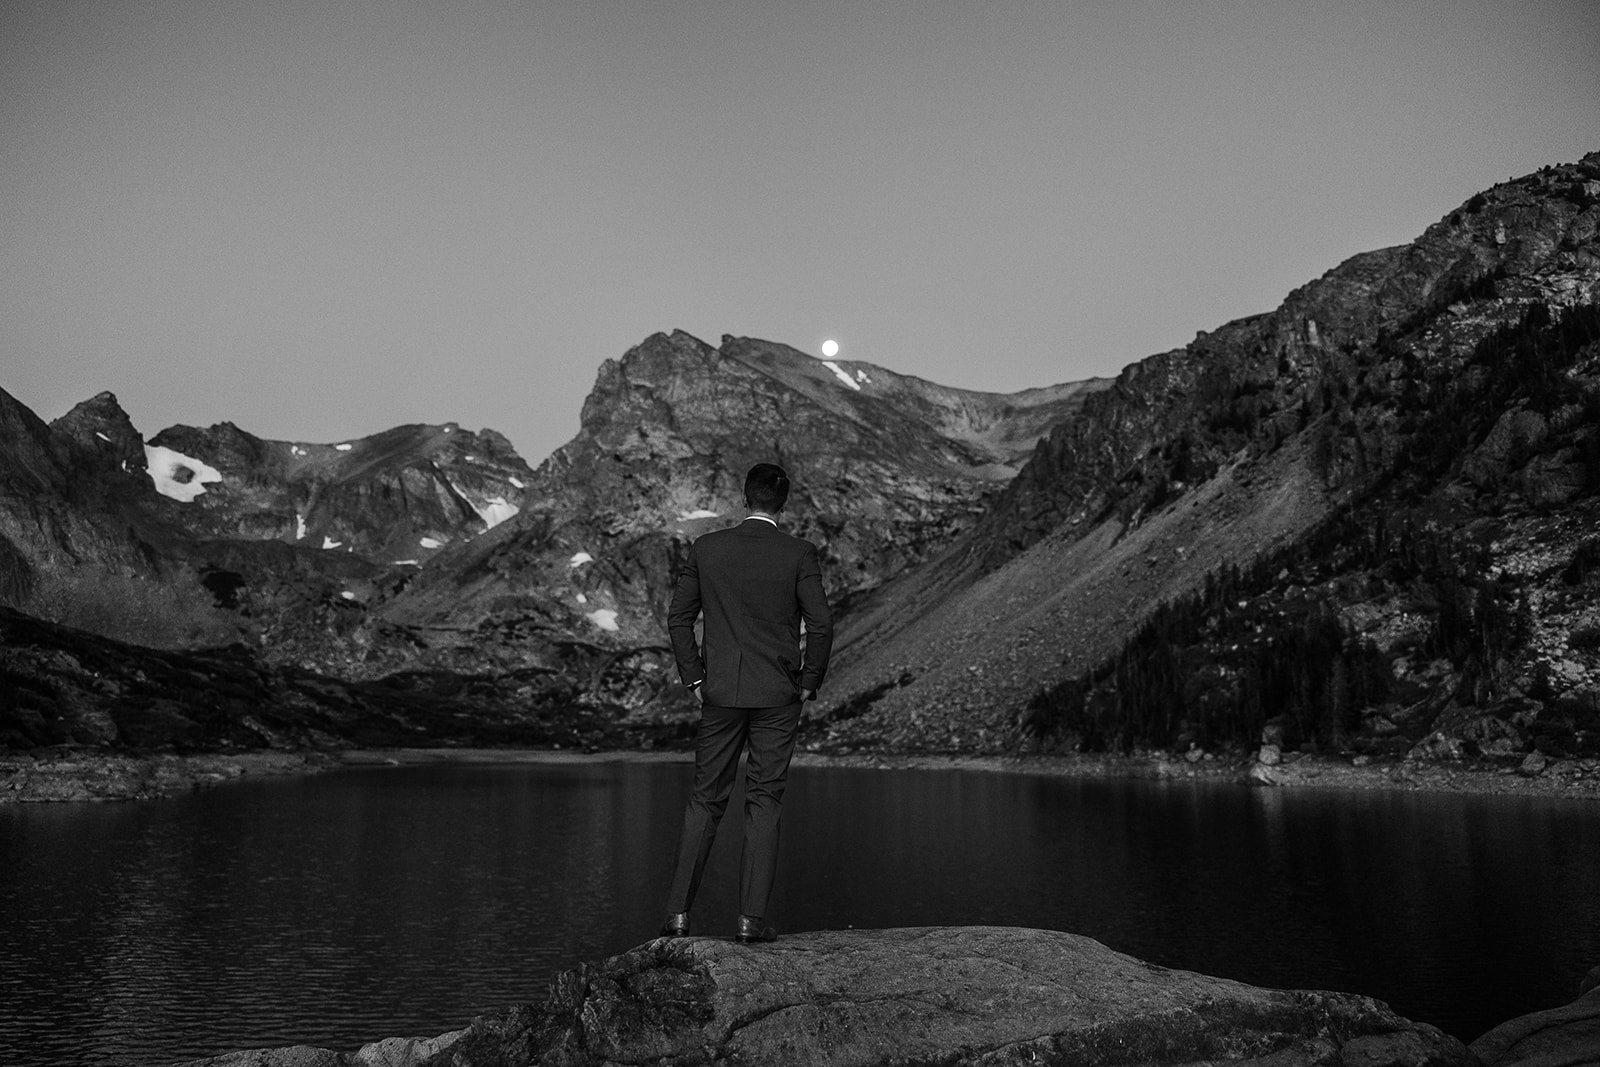 groom stands on edge of rock and looks out over lake